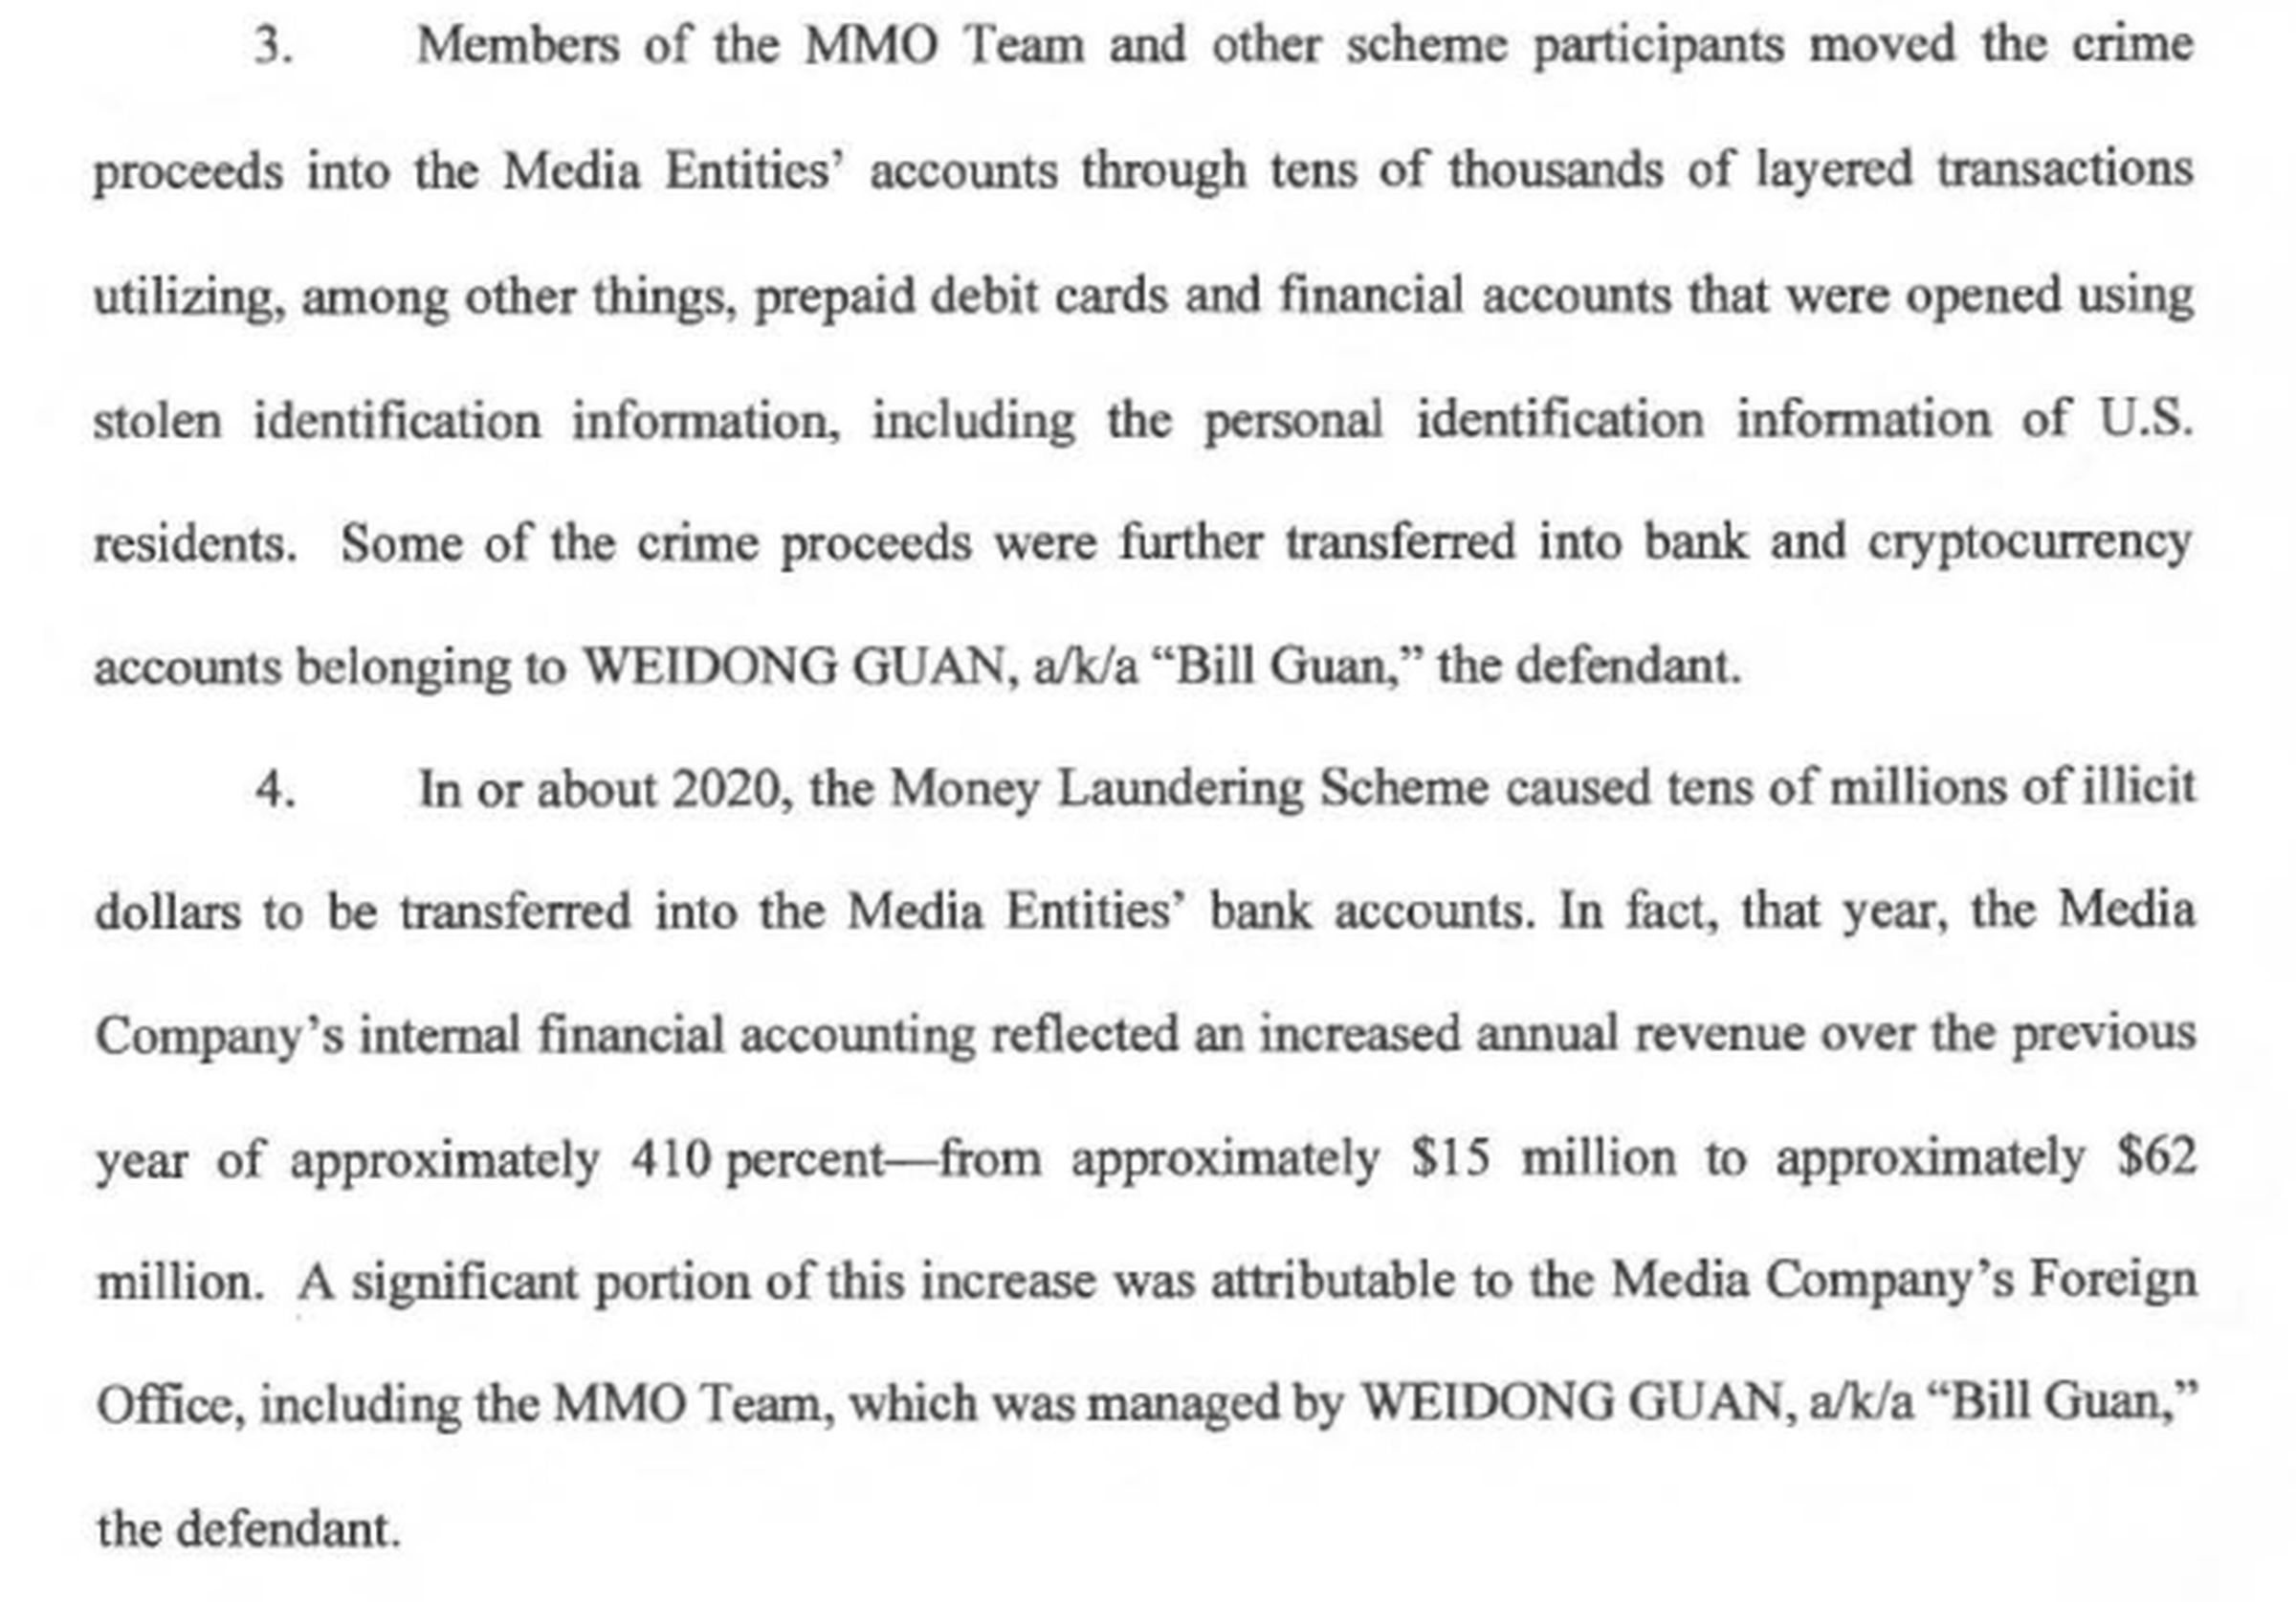 3. Members of the MMO Team and other scheme participants moved the crime proceeds into the Media Entities’ accounts through tens of thousands of layered transactions utilizing, among other things, prepaid debit cards and financial accounts that were opened using stolen identification information, including the personal identification information of U.S. residents. 